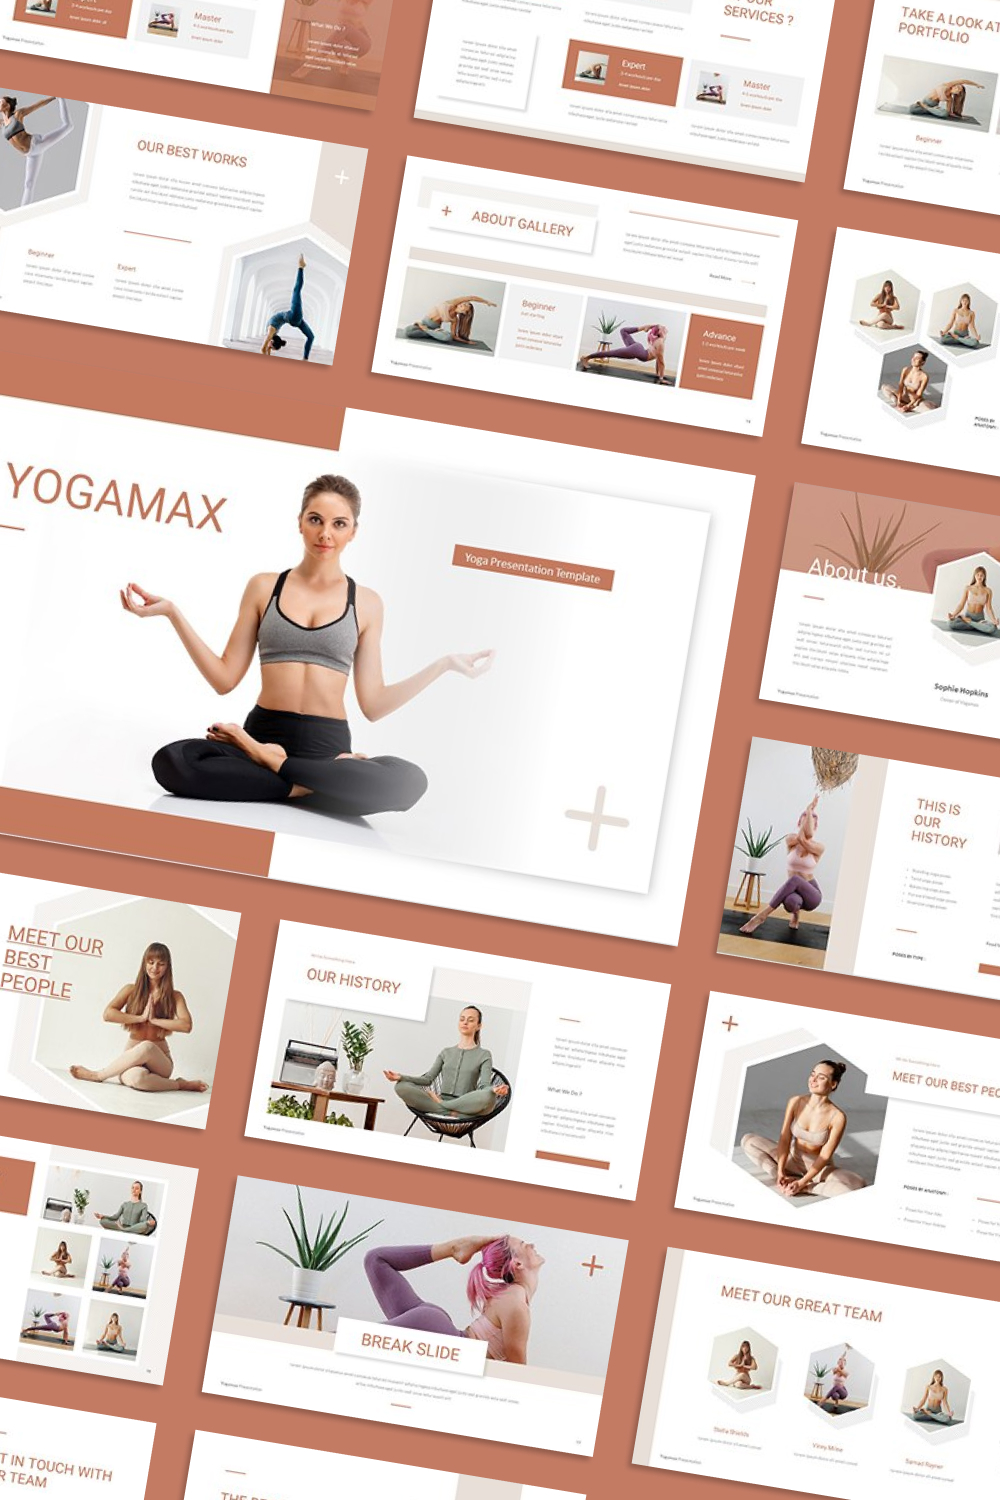 Stylization of the presentation with the theme of yoga.